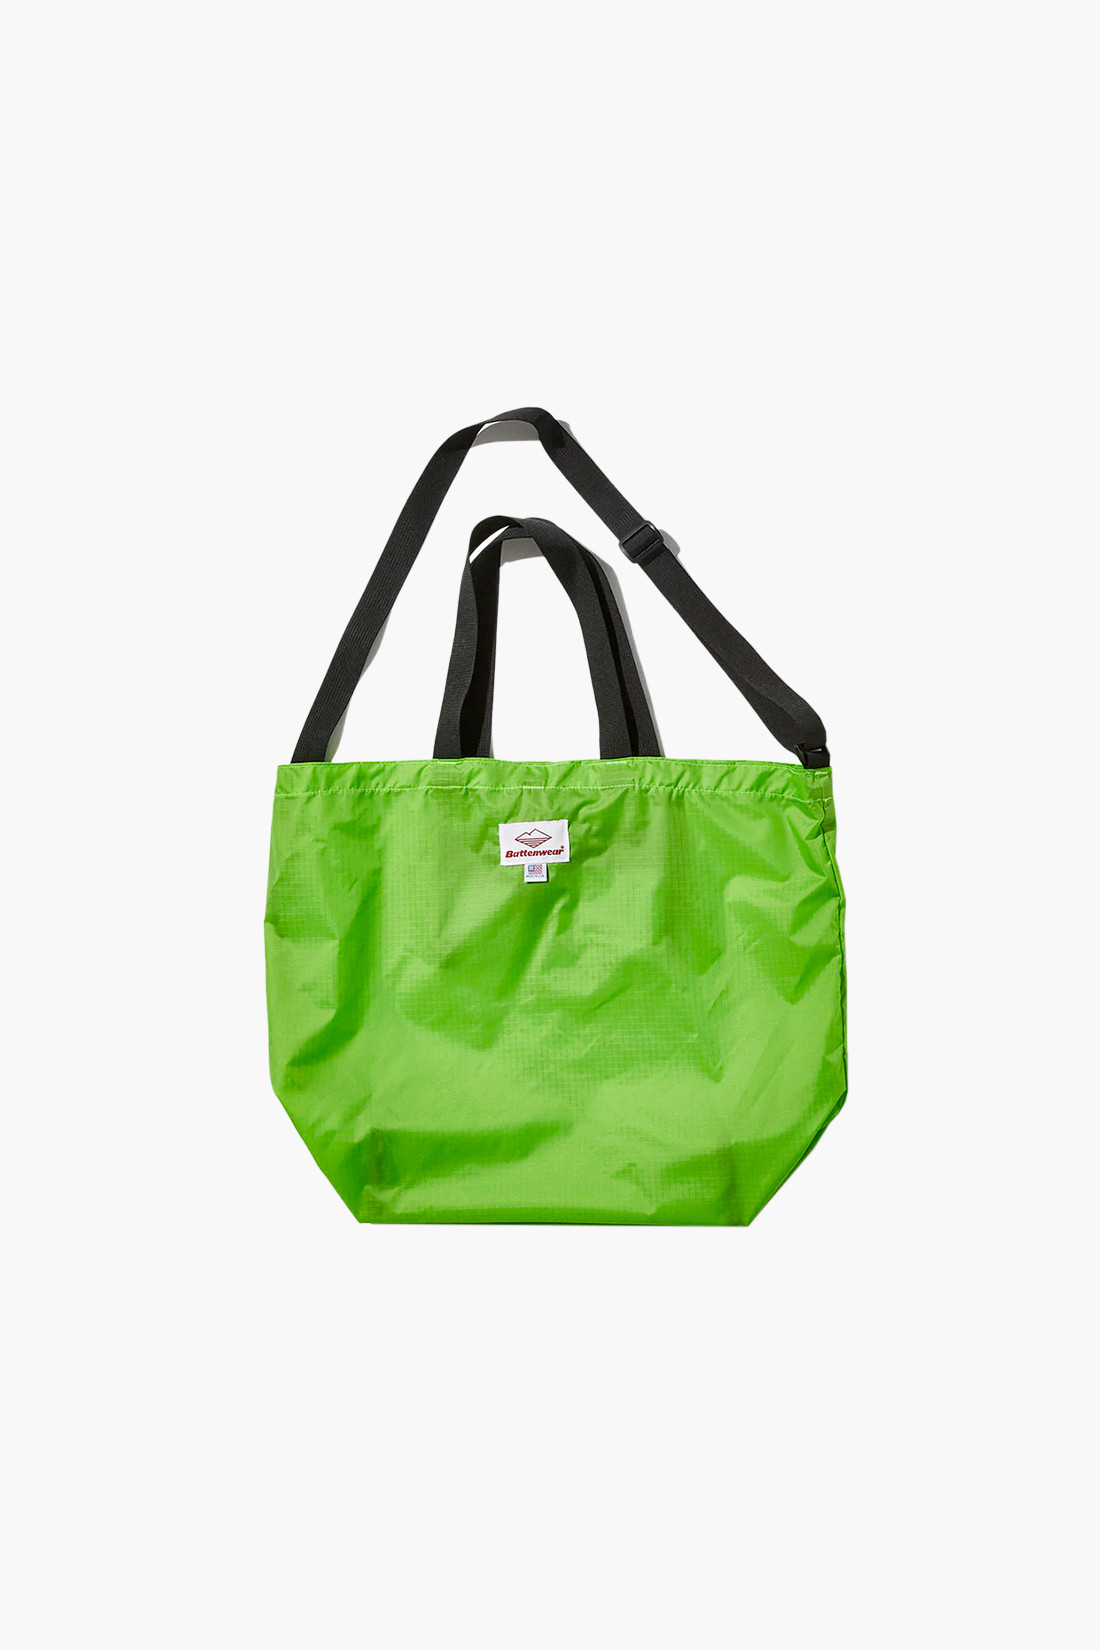 Packable tote Lime green/black